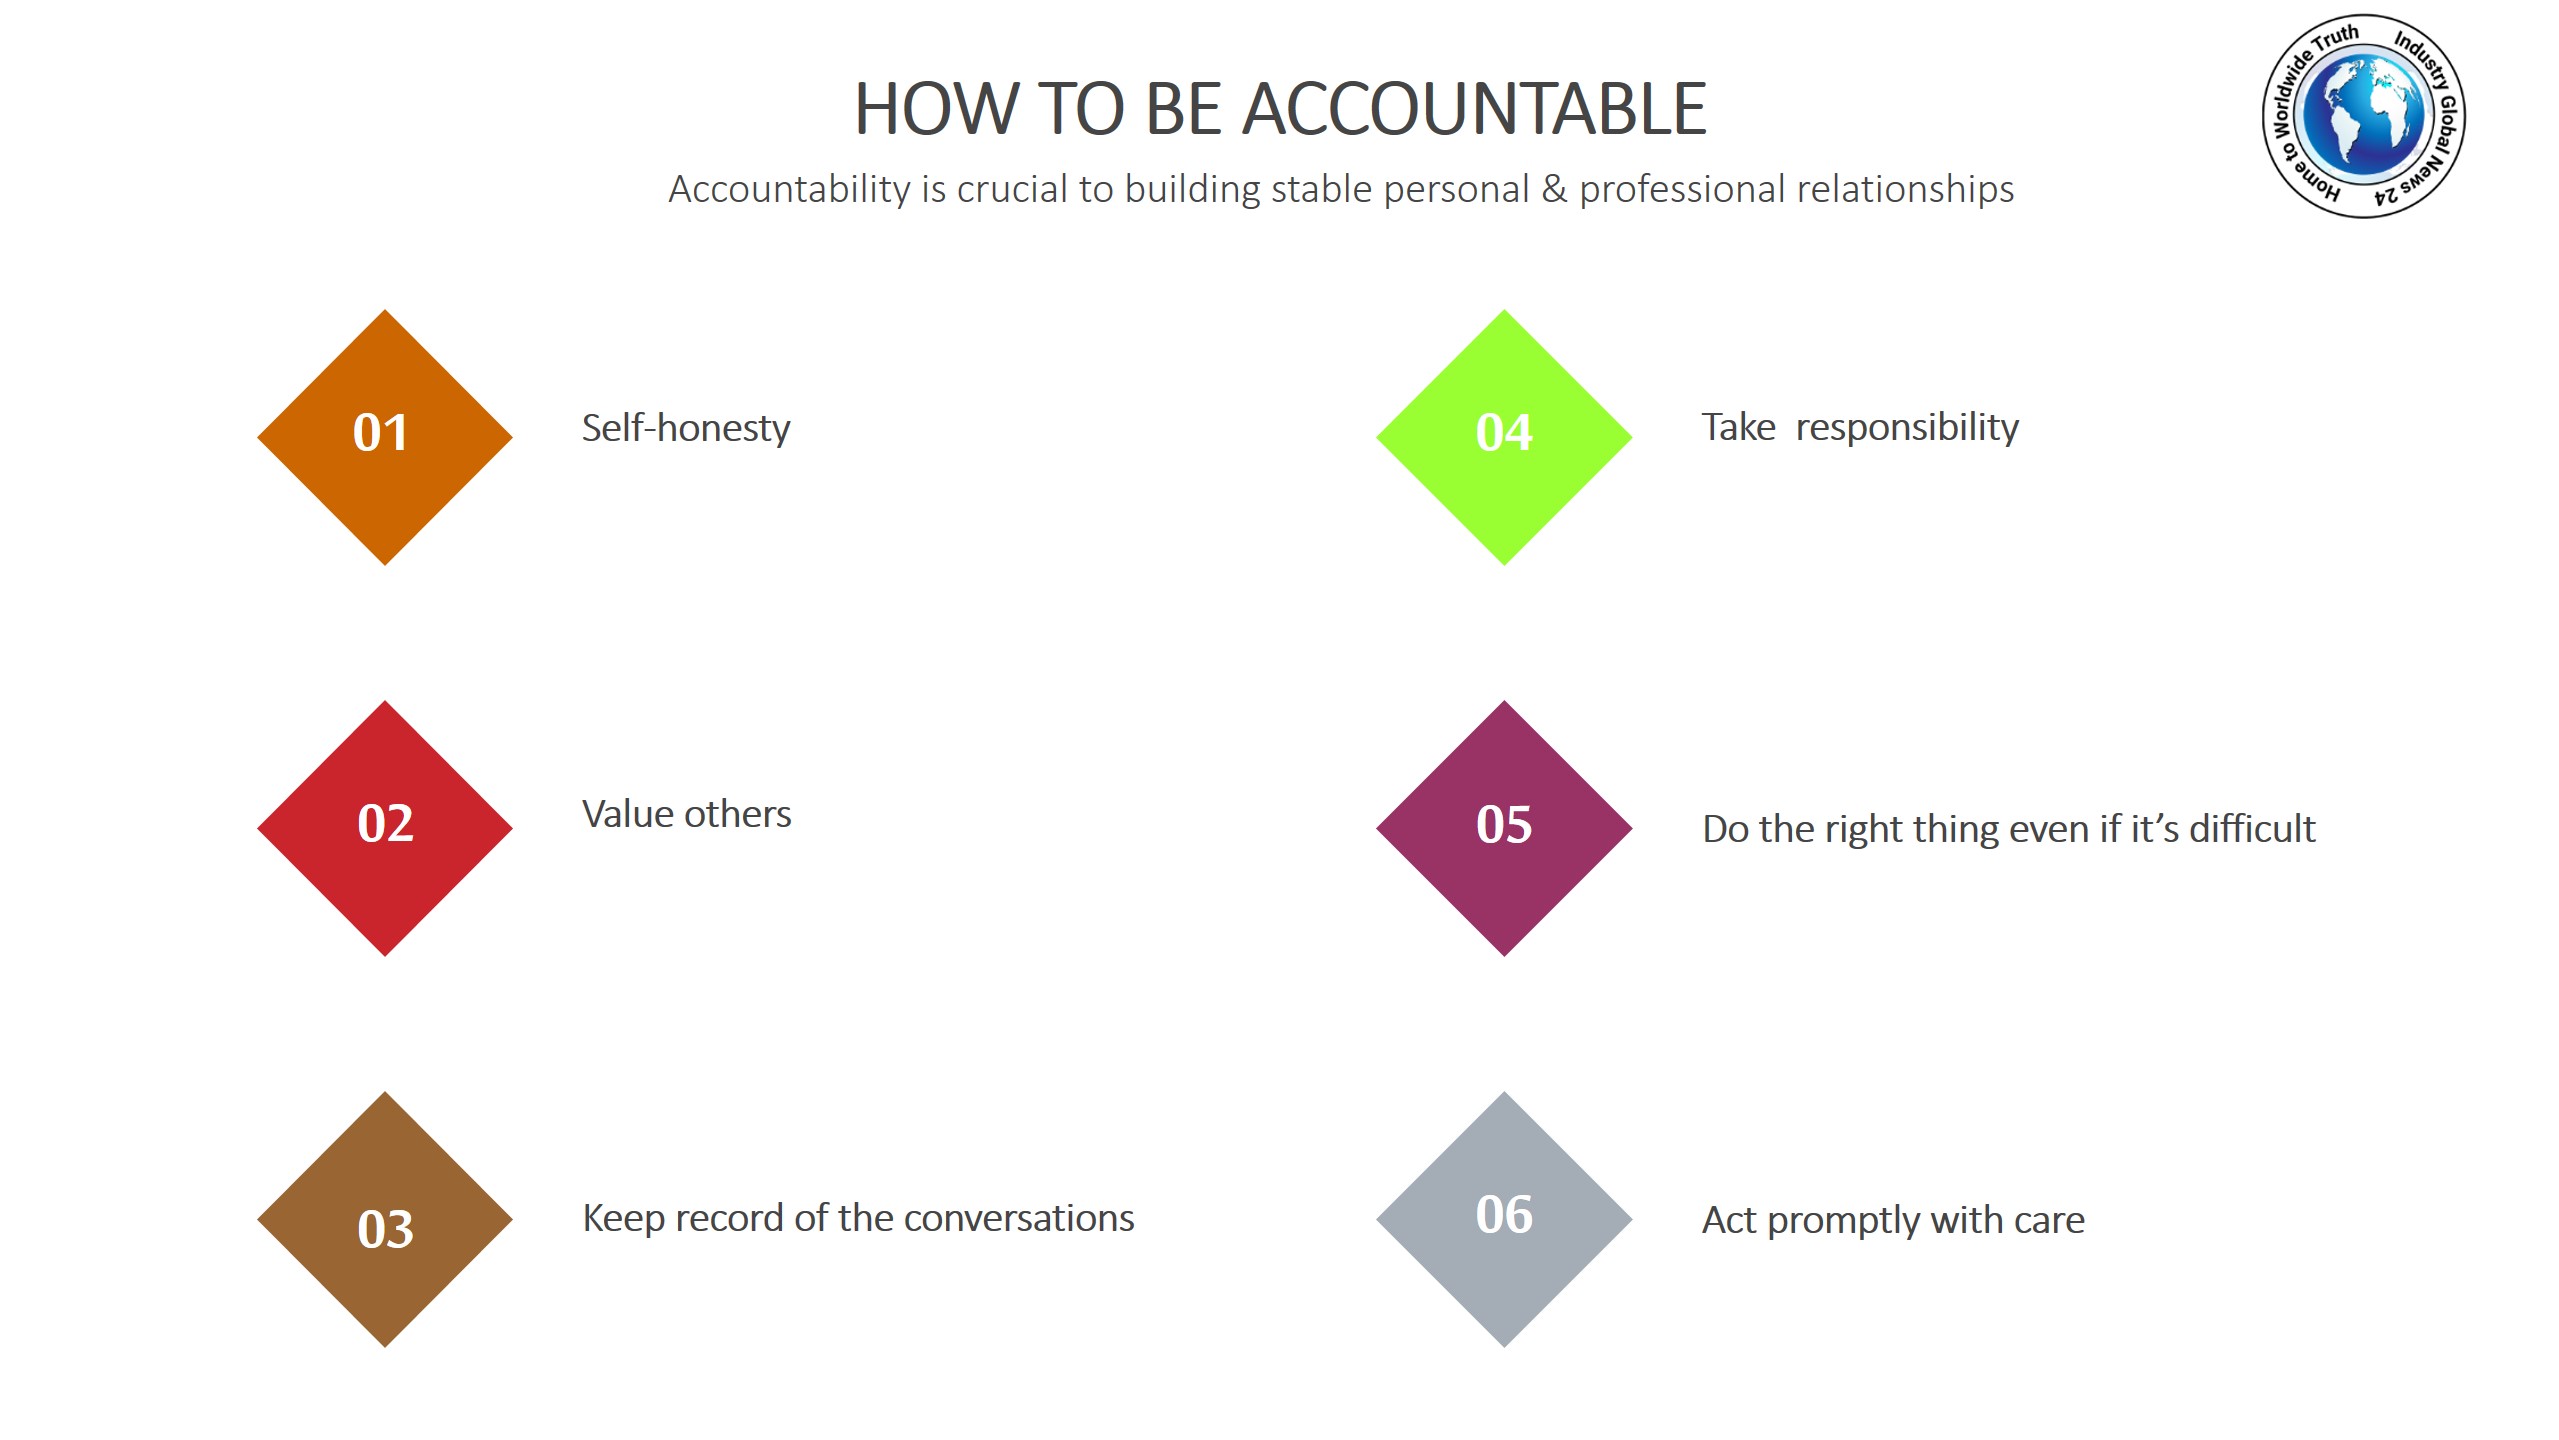 How to be accountable